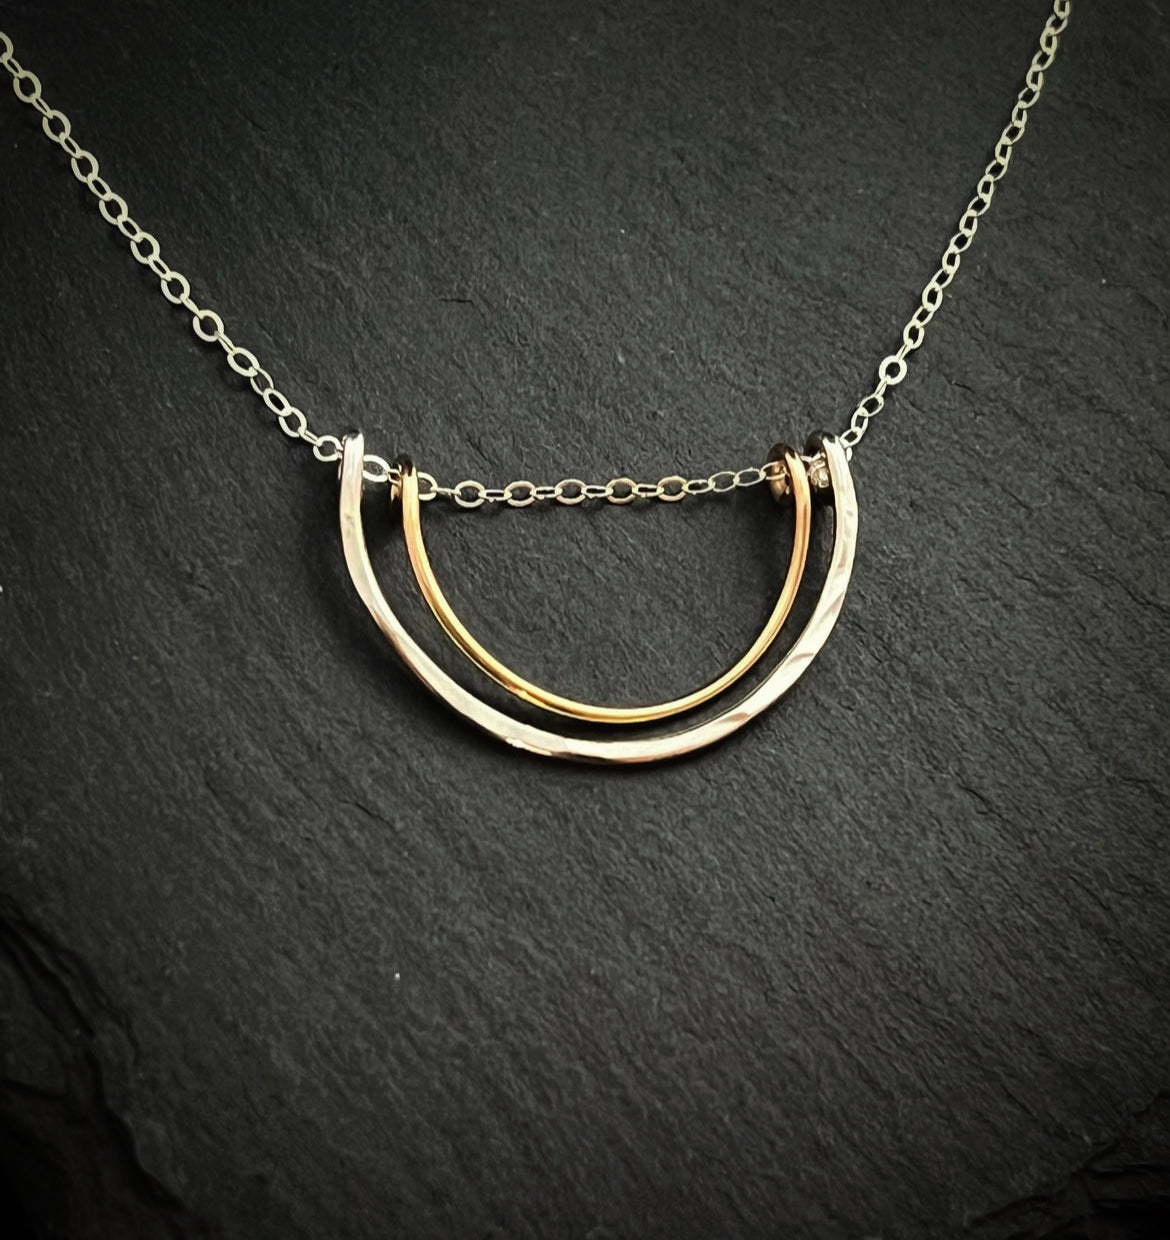 Kenya Necklace, Contemporary Mixed Metal Design | Moonrise Jewelry